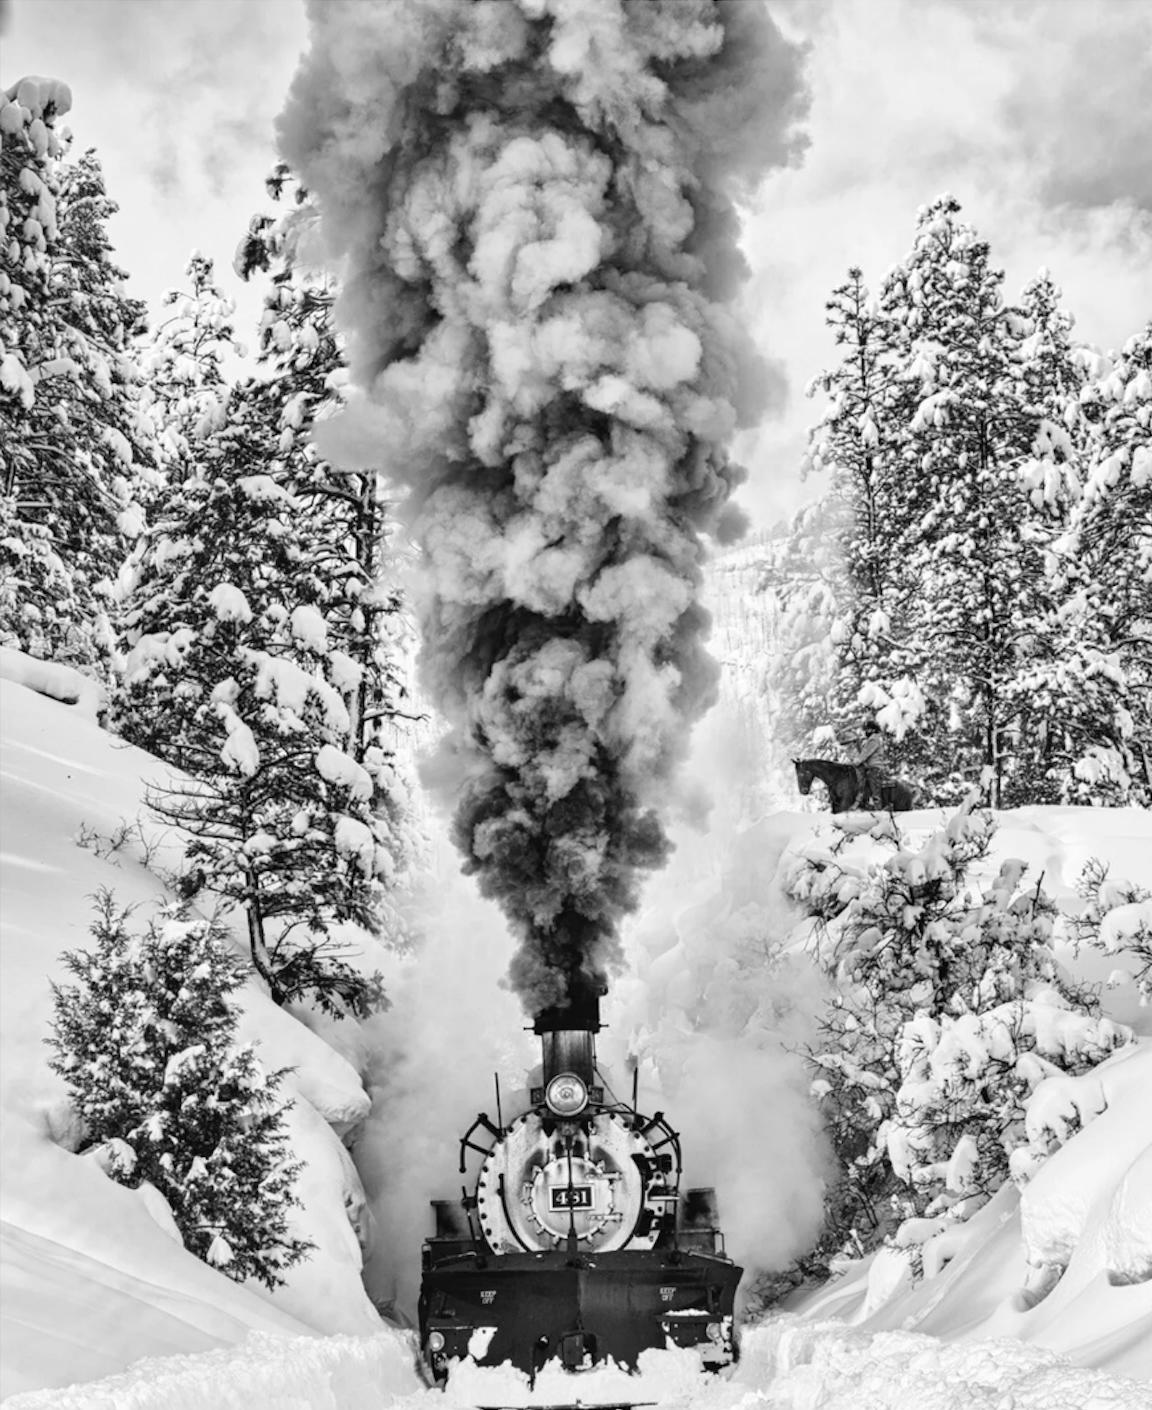 David Yarrow Black and White Photograph – Parts Unknown II 